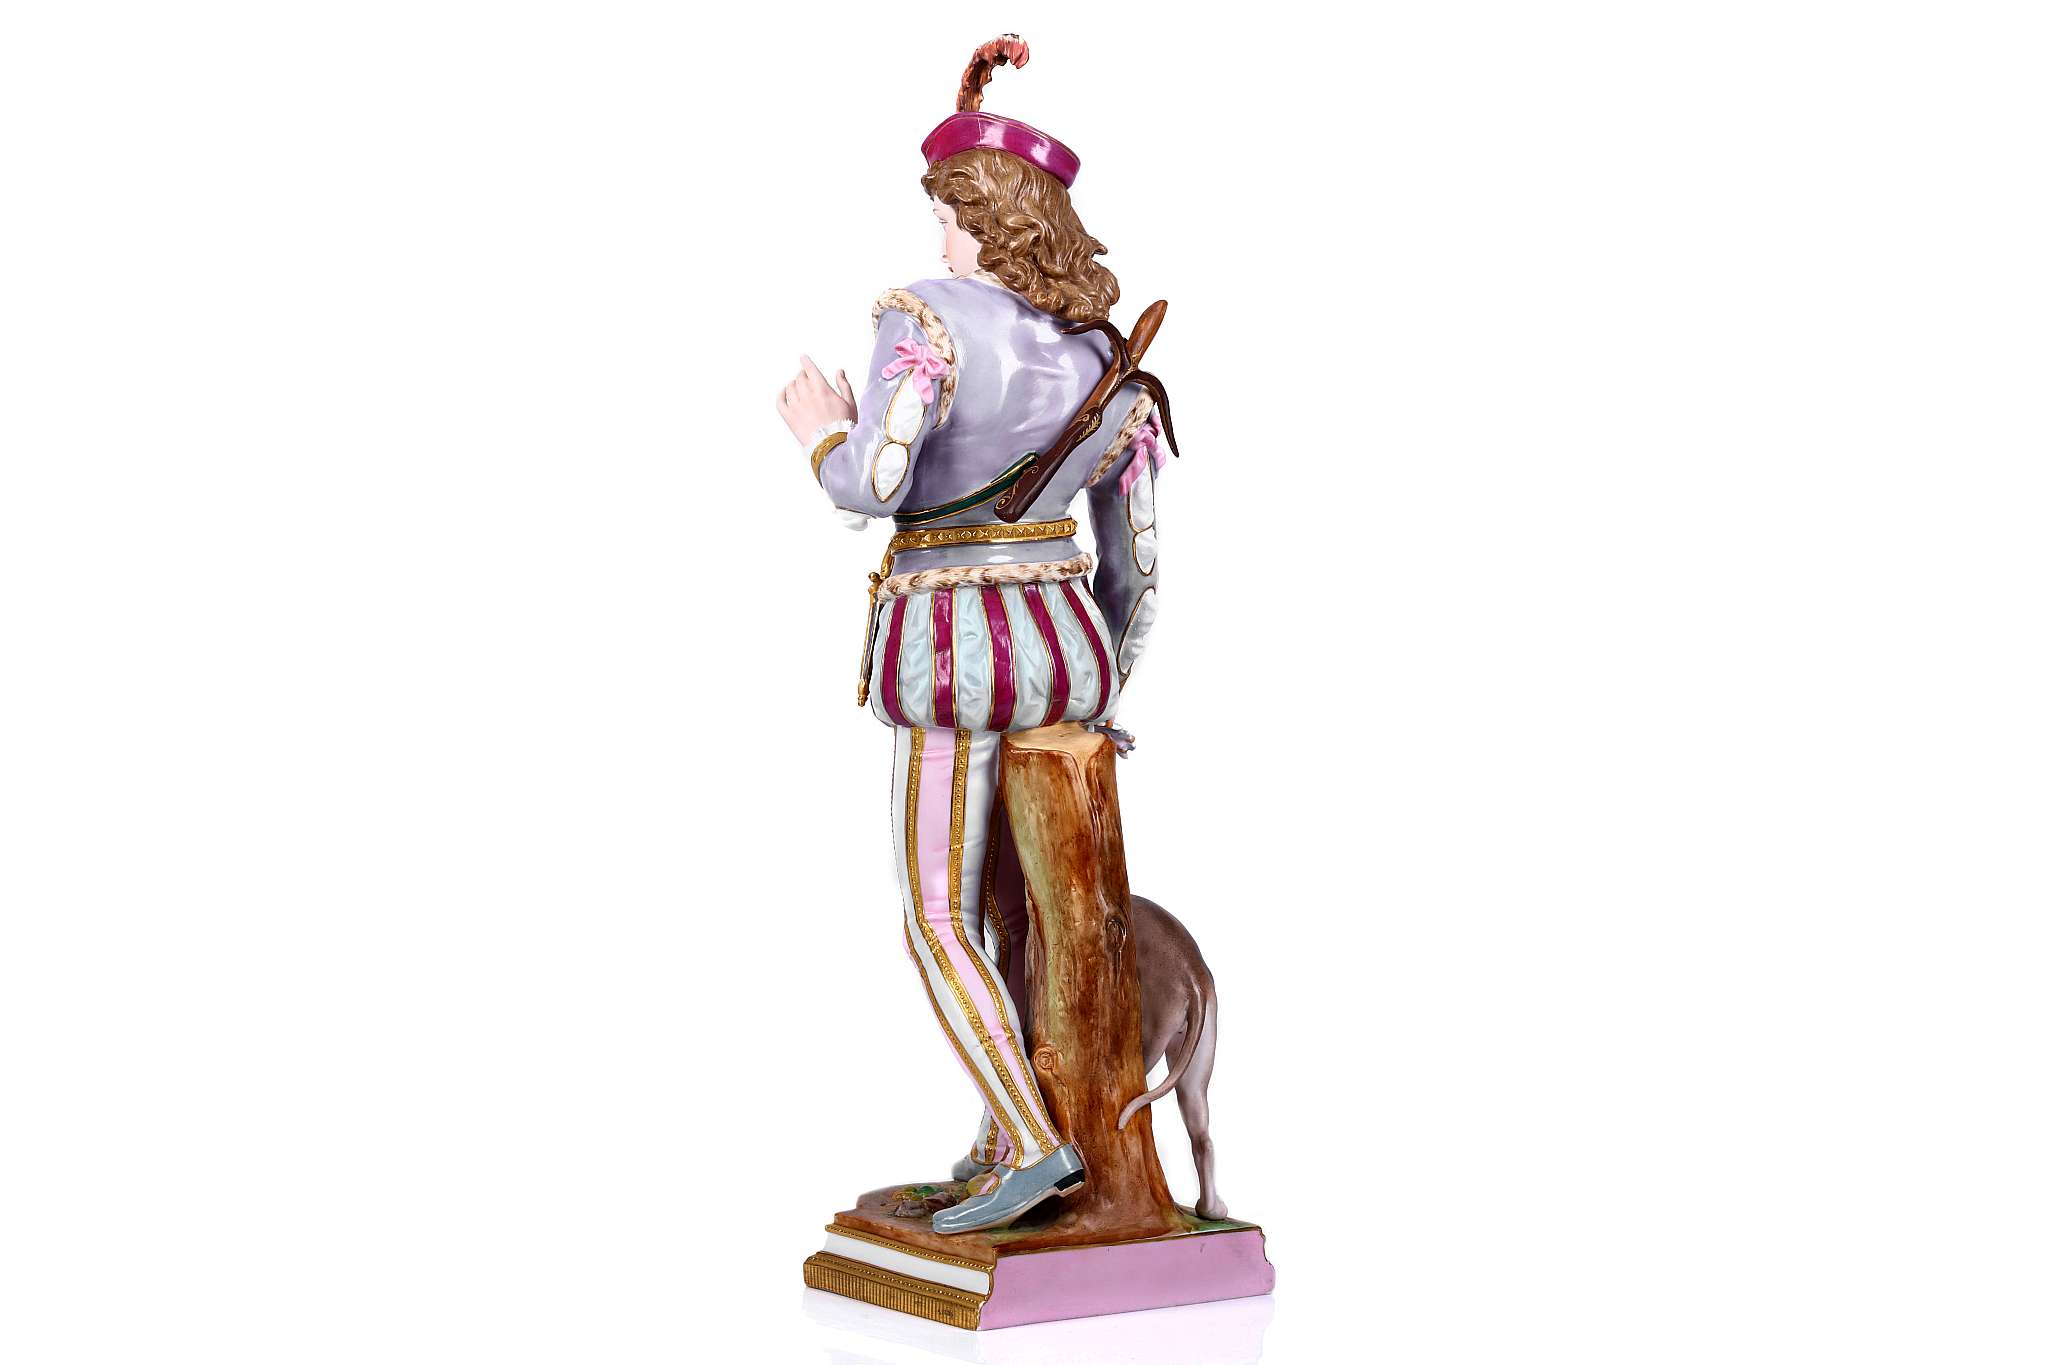 A LARGE FRENCH BISQUE PORCELAIN FIGURE OF A HUNTSMAN, late 19th or early 20th century, modelled - Image 3 of 16